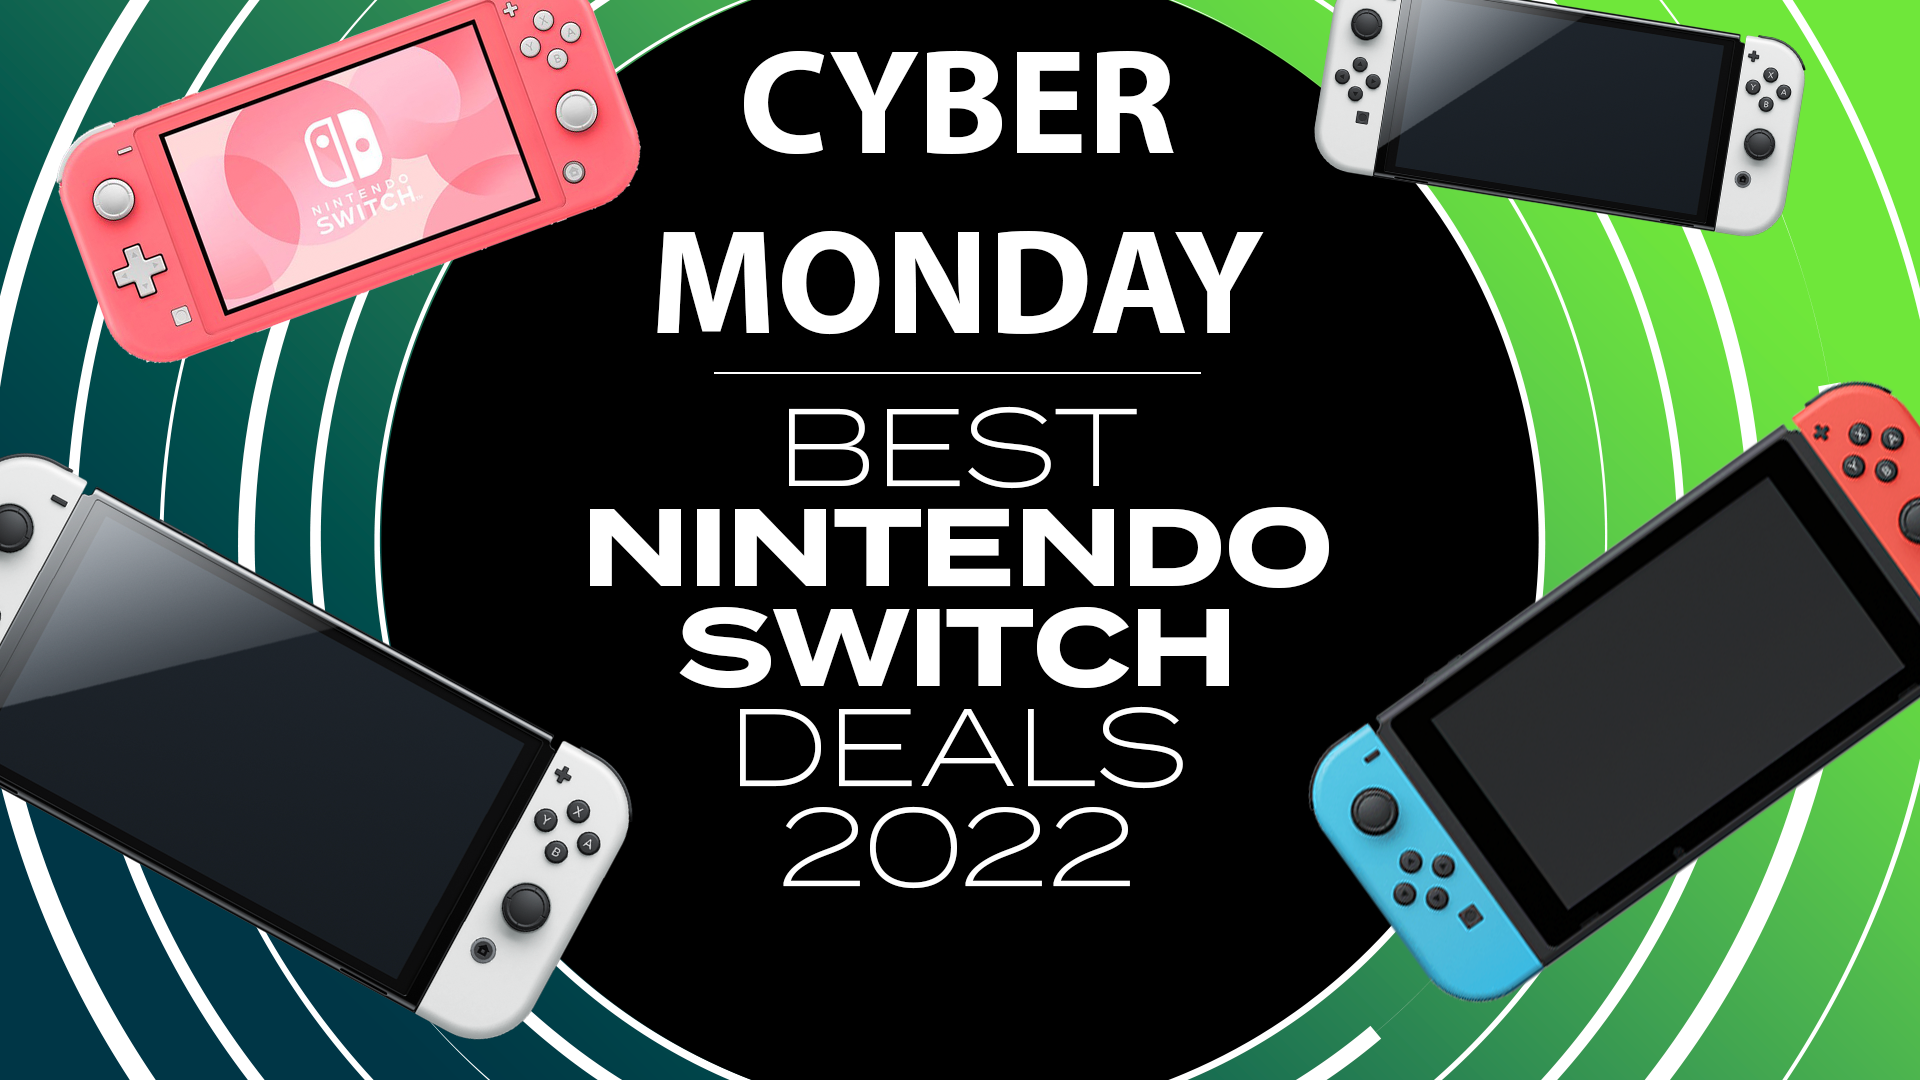 Lily Forskudssalg sum Nintendo Switch Cyber Monday deals 2022: all the best offers LIVE |  Eurogamer.net